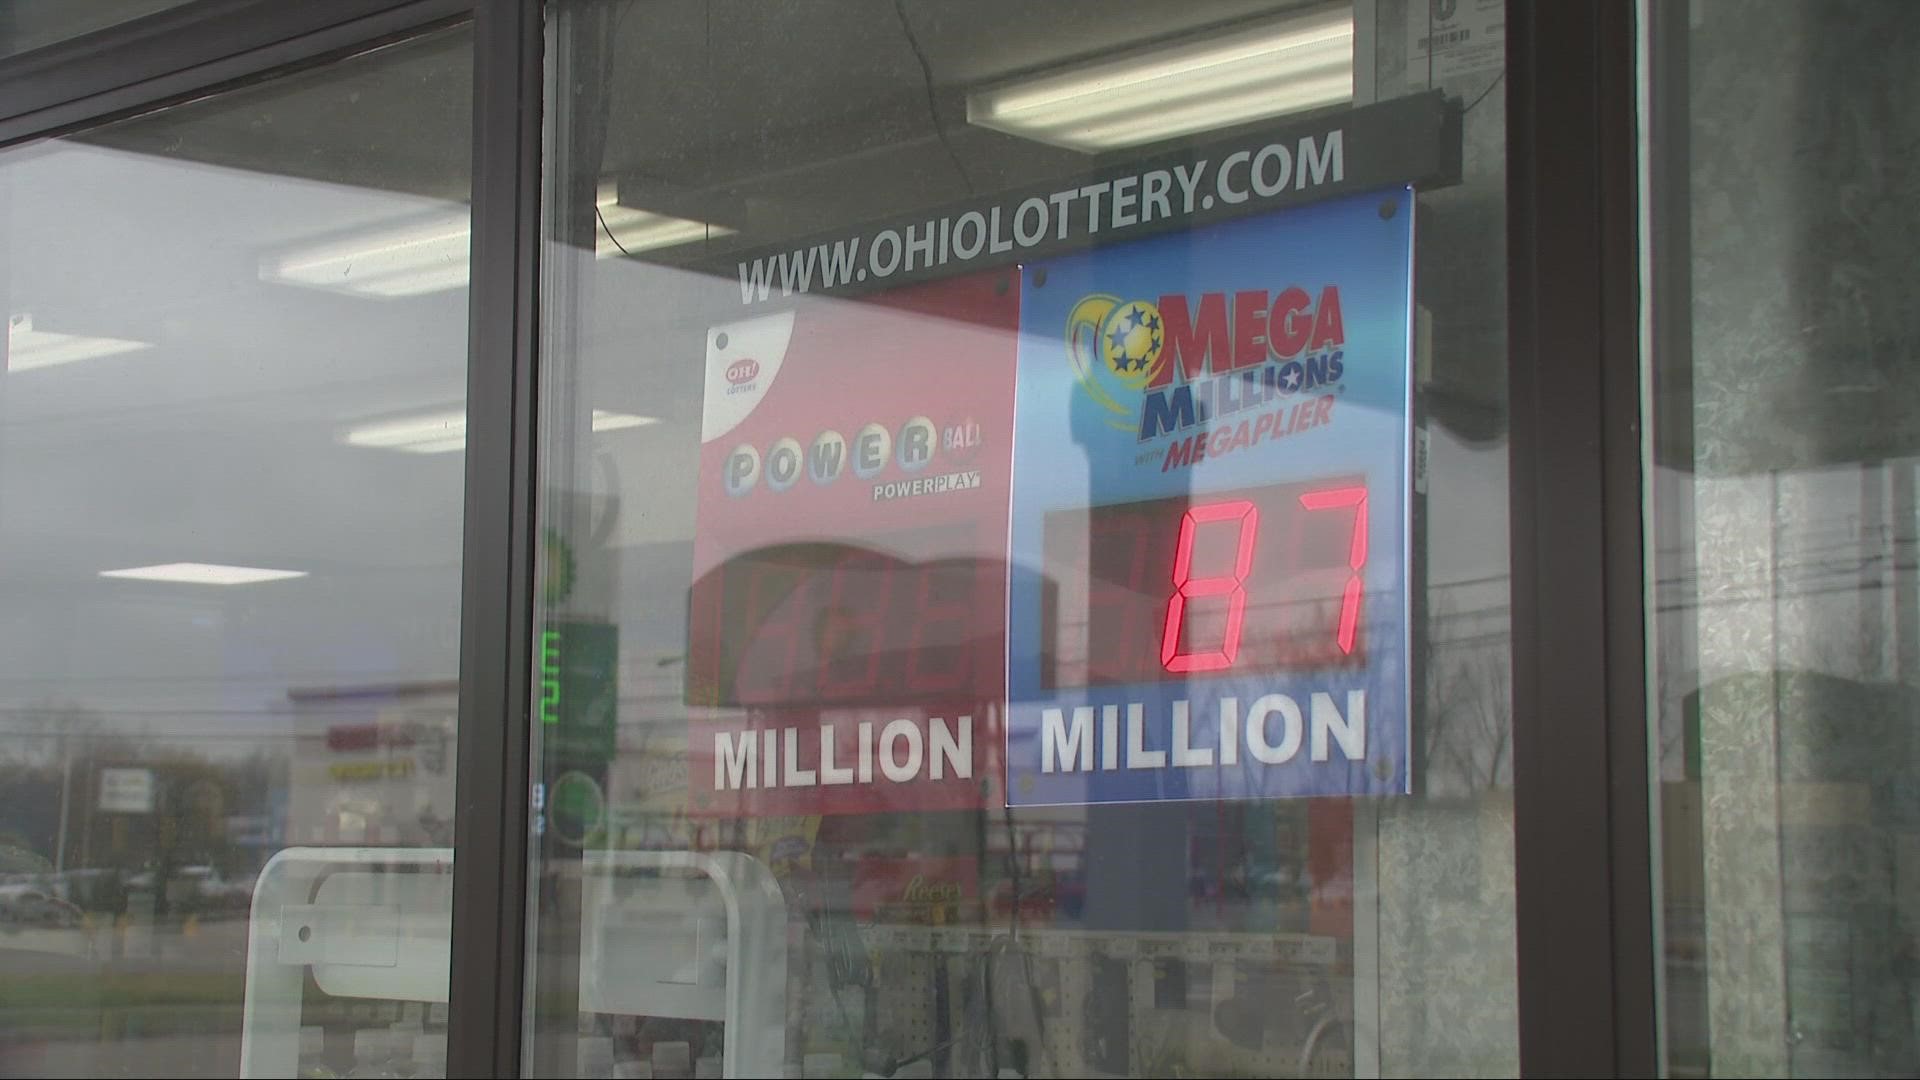 According to the Ohio Lottery, one of the winning million dollar tickets was sold at the Norwalk Mickey Mart.